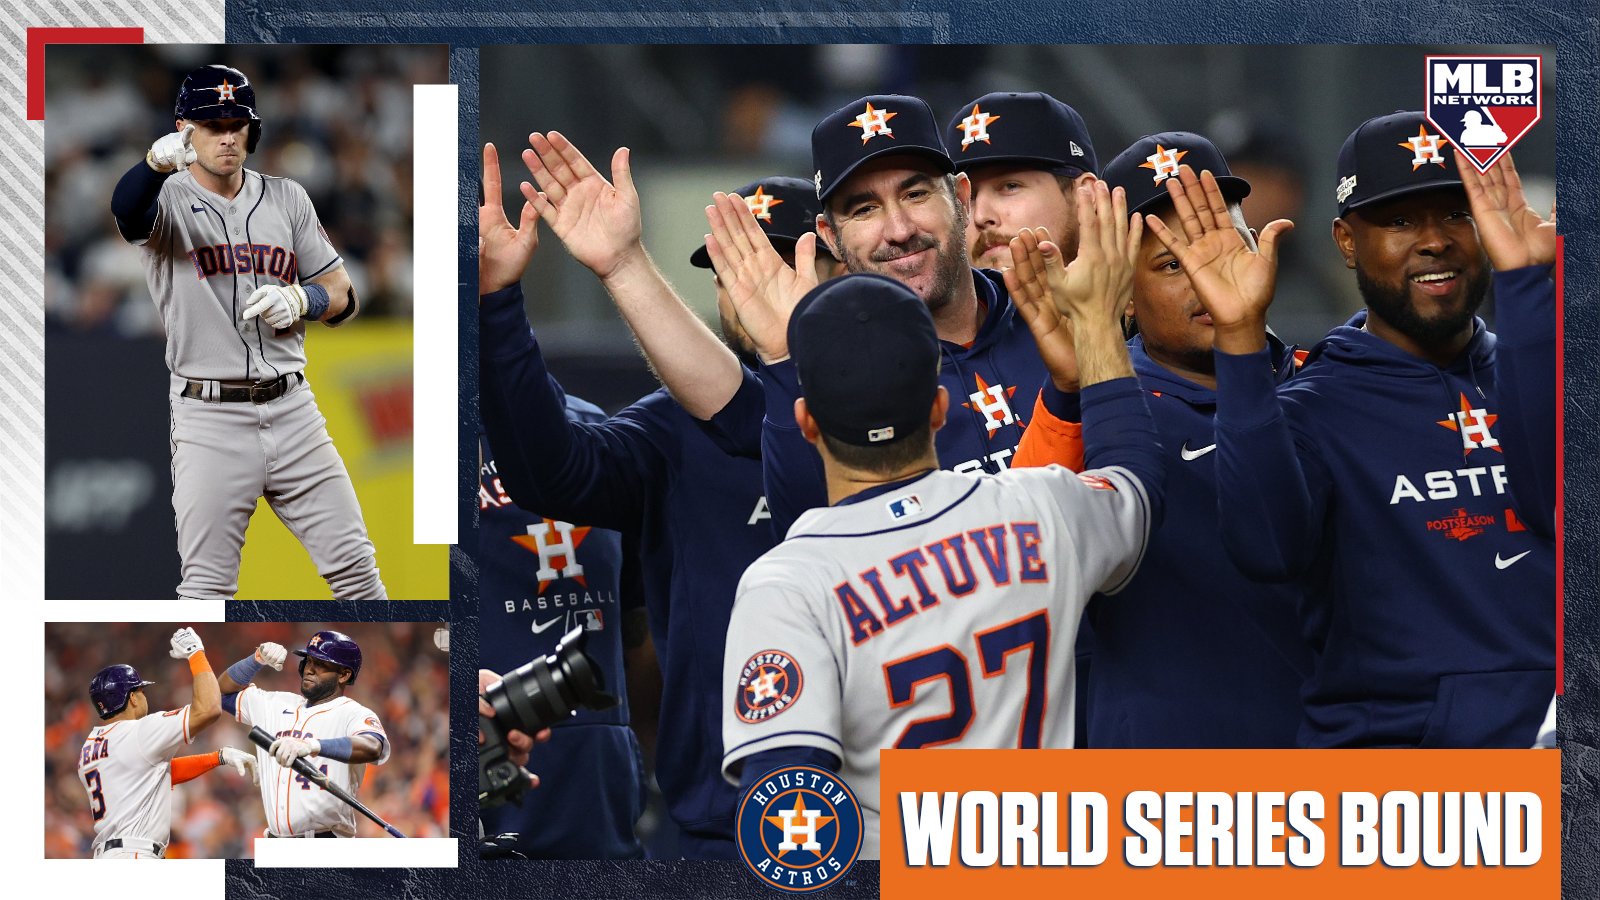 MLB Network on X: The @astros are heading back to the World Series! 🔥  They complete the 4-game sweep of the Yankees and are heading to their  fourth World Series in the